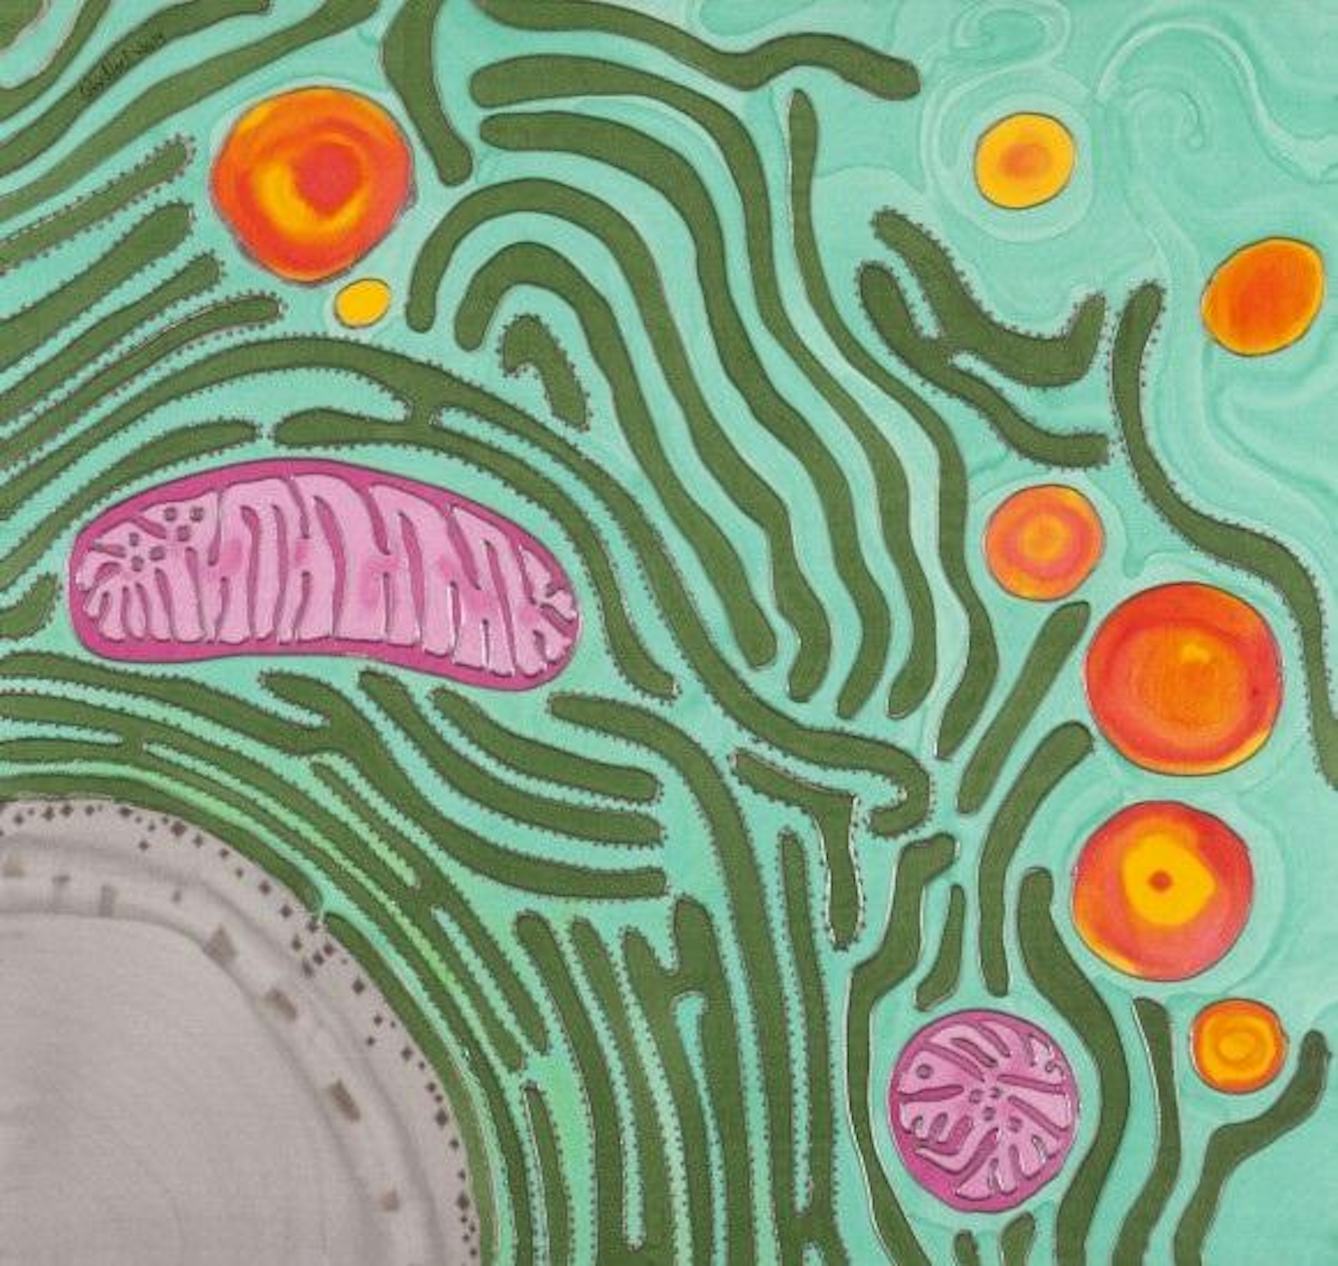 An colourful illustration of some cells swimming about